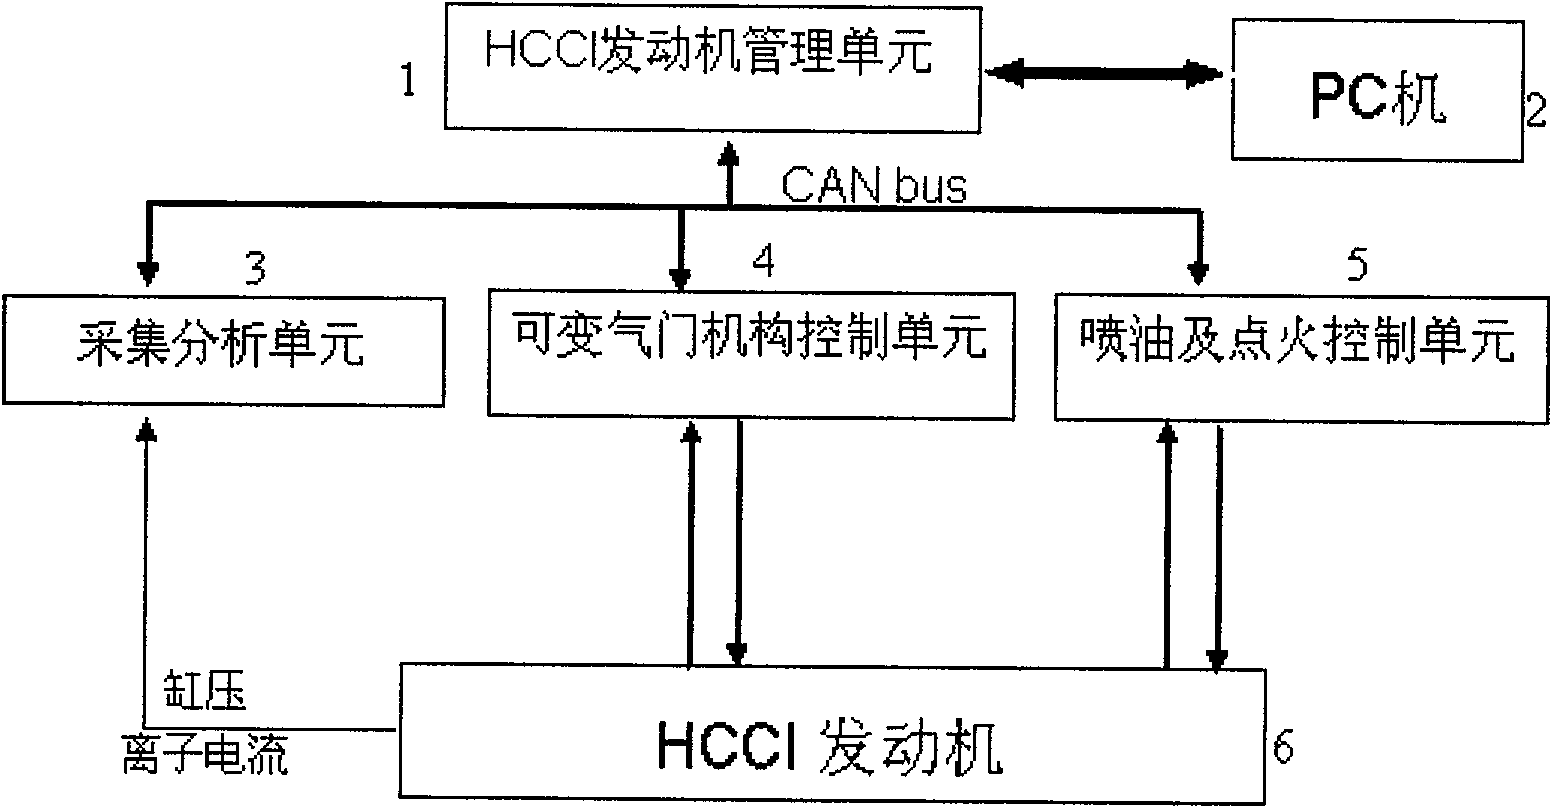 Control system of HCCI/SI double-mode harmonization press-combustion engine and method therefor